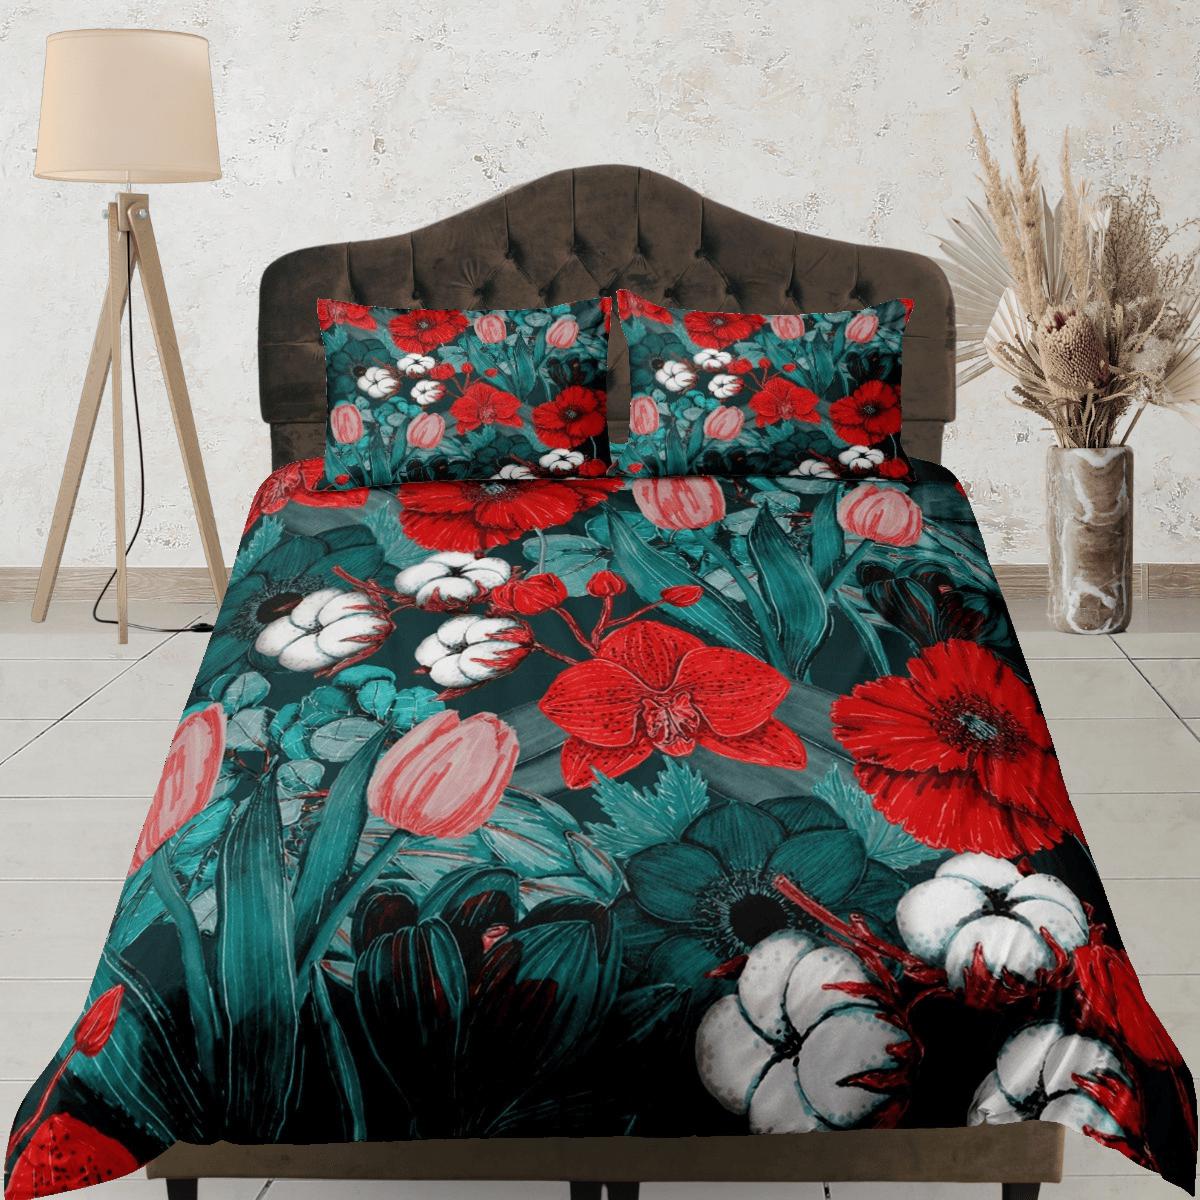 daintyduvet Red poppies and tulip floral duvet cover colorful bedding, teen girl bedroom, baby girl crib bedding boho maximalist bedspread aesthetic